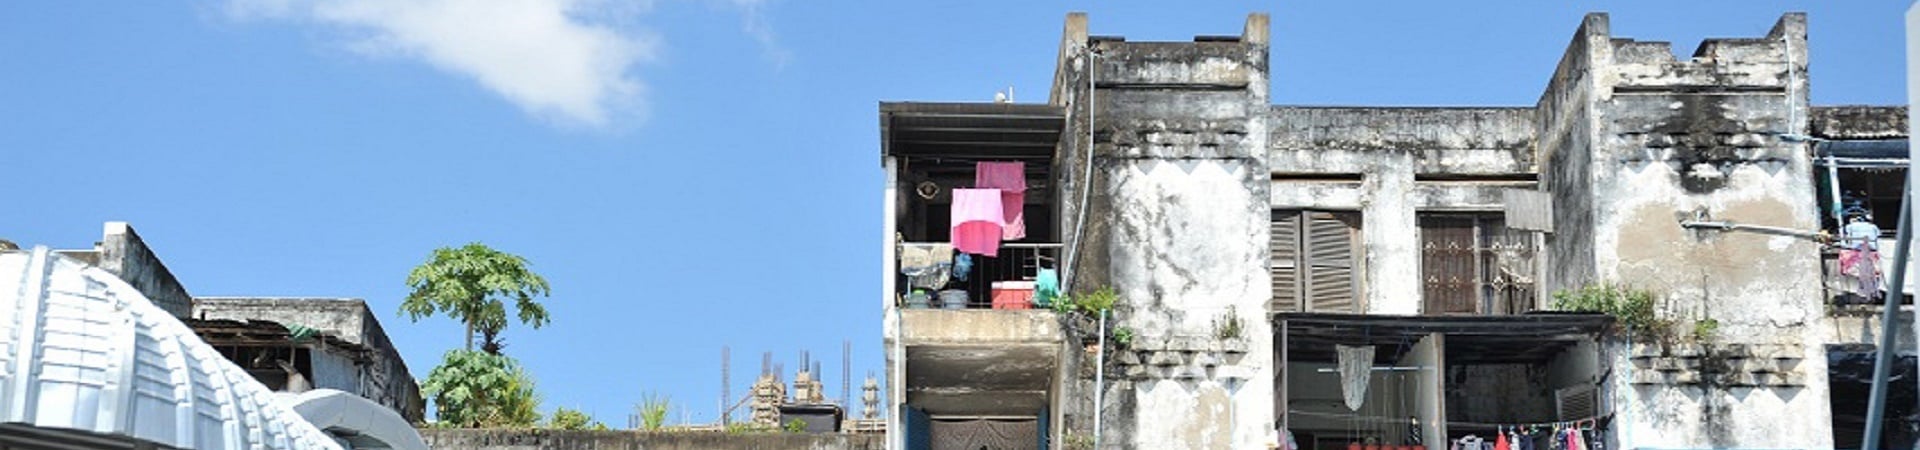 Image of Backstreets, Temples & Communities